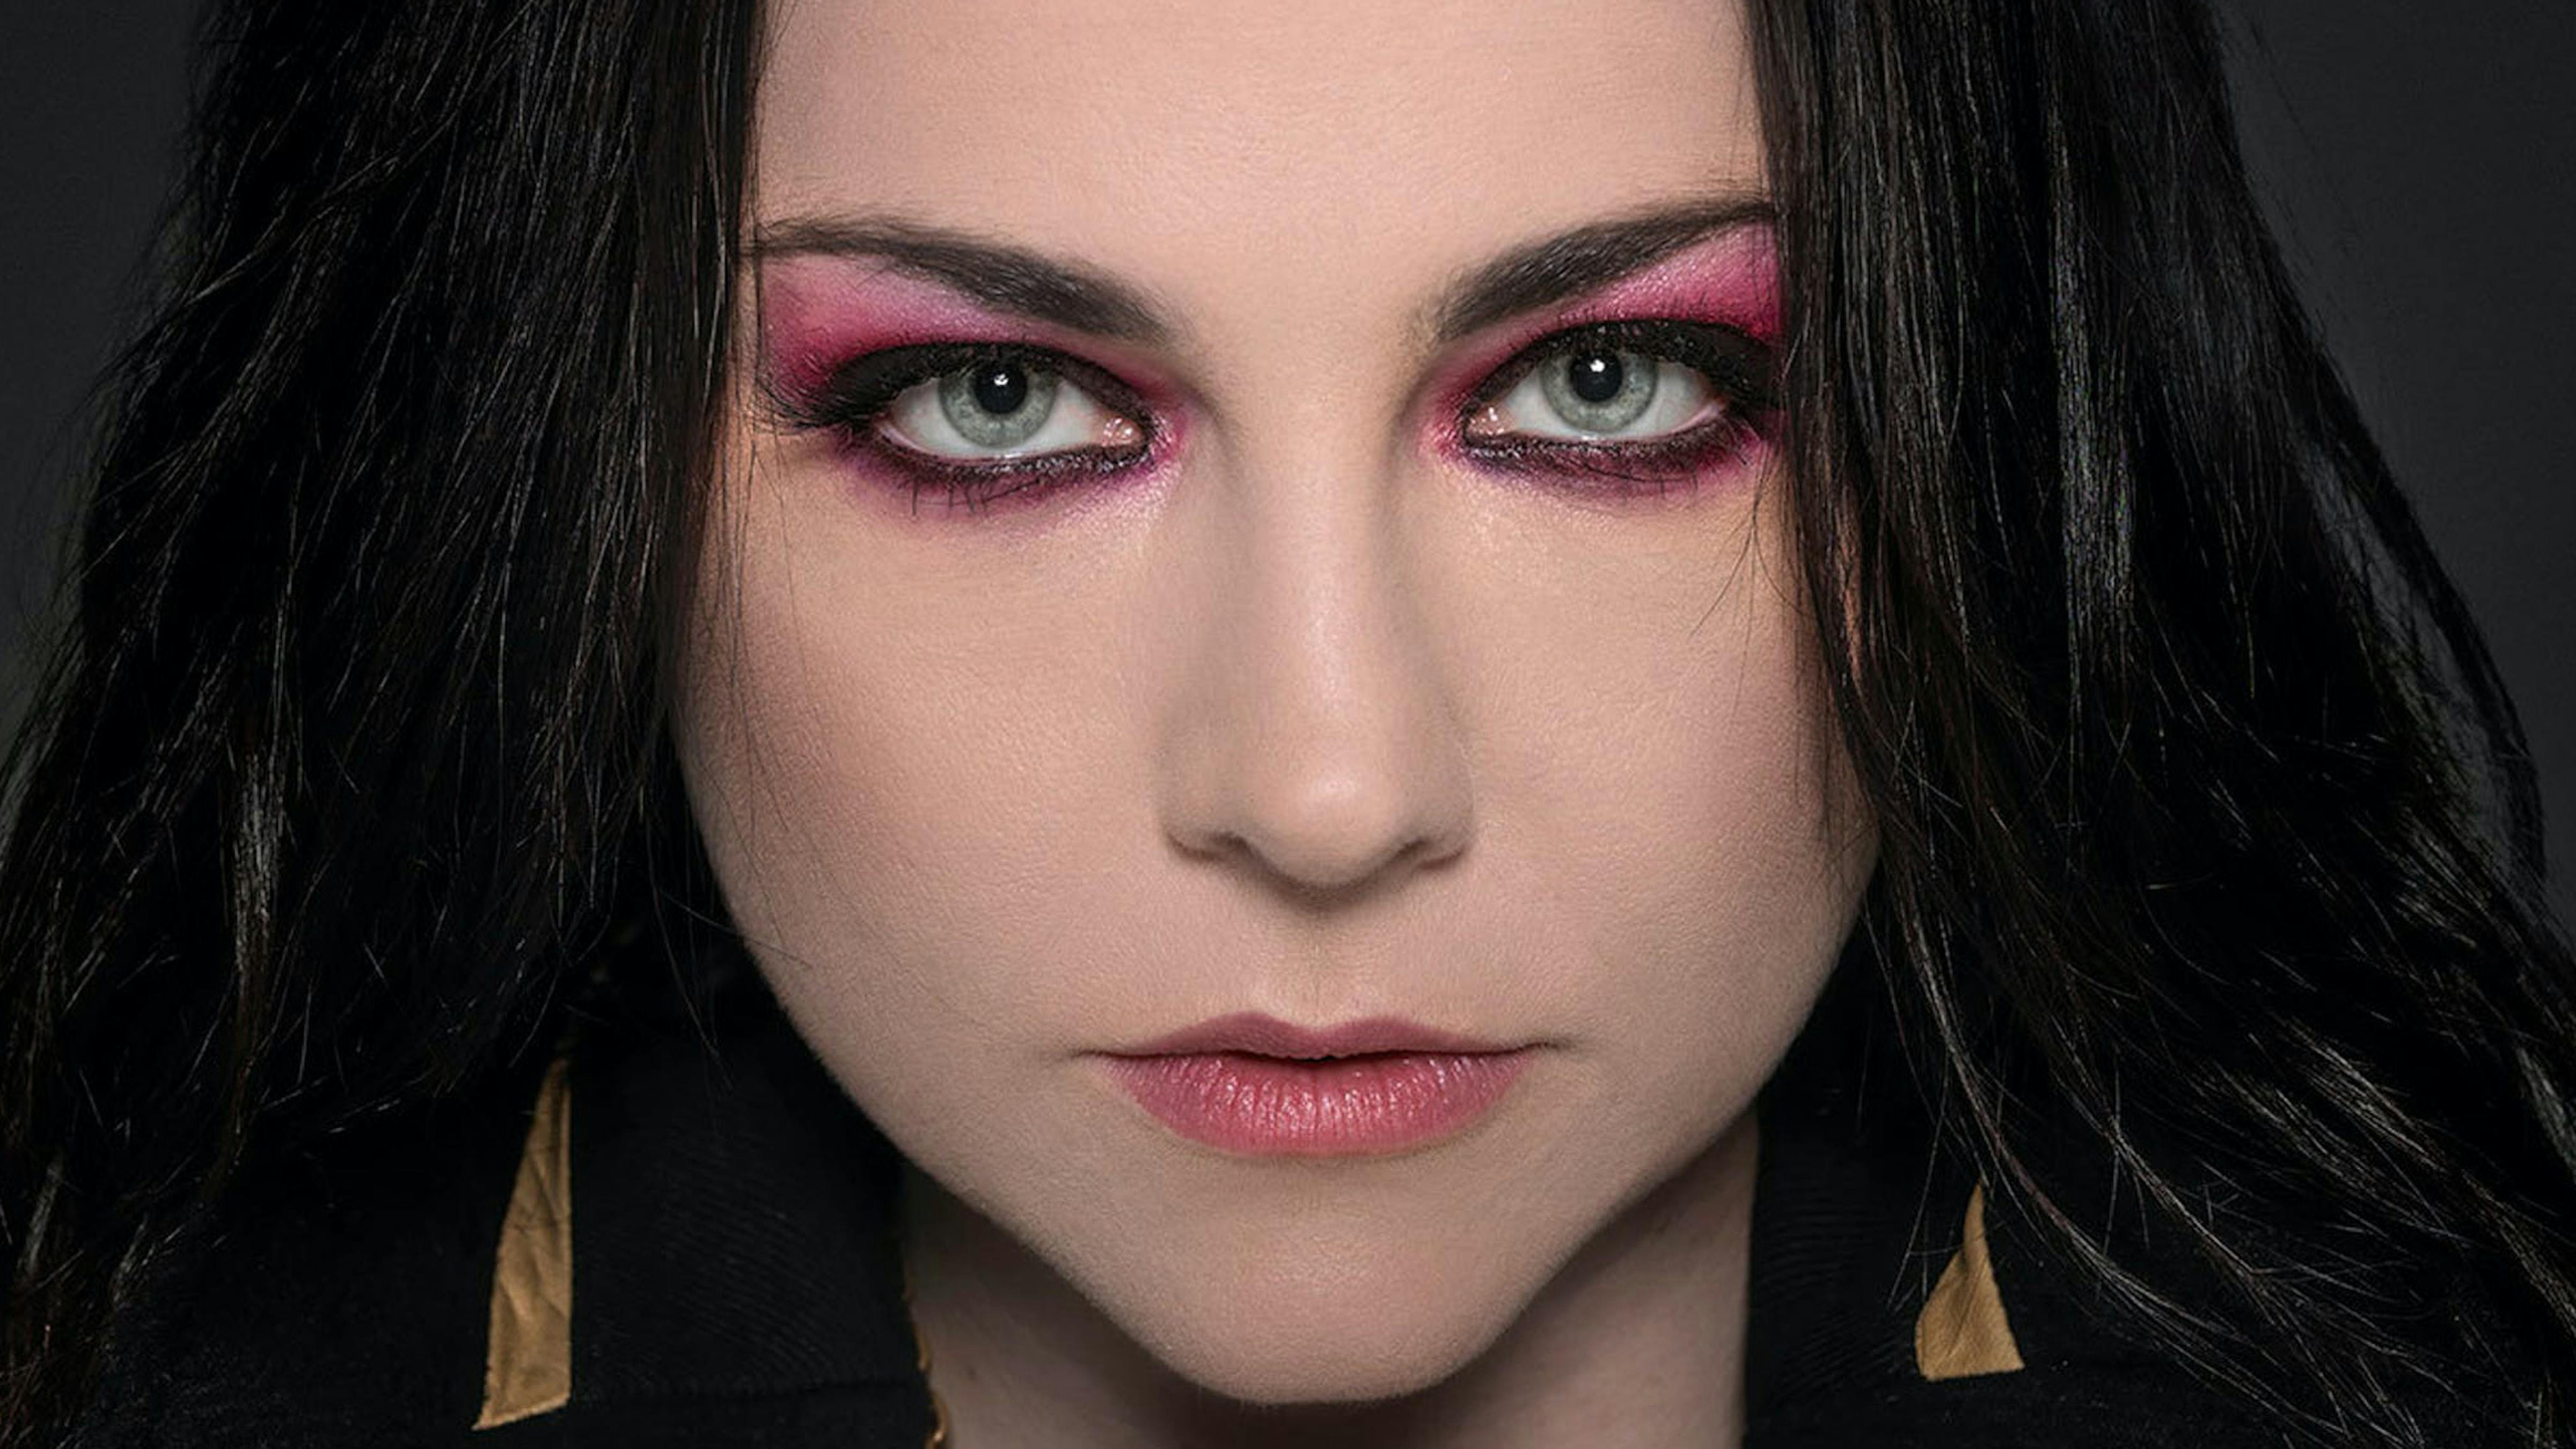 Evanescence's Amy Lee “I have total hope… but it's important to be